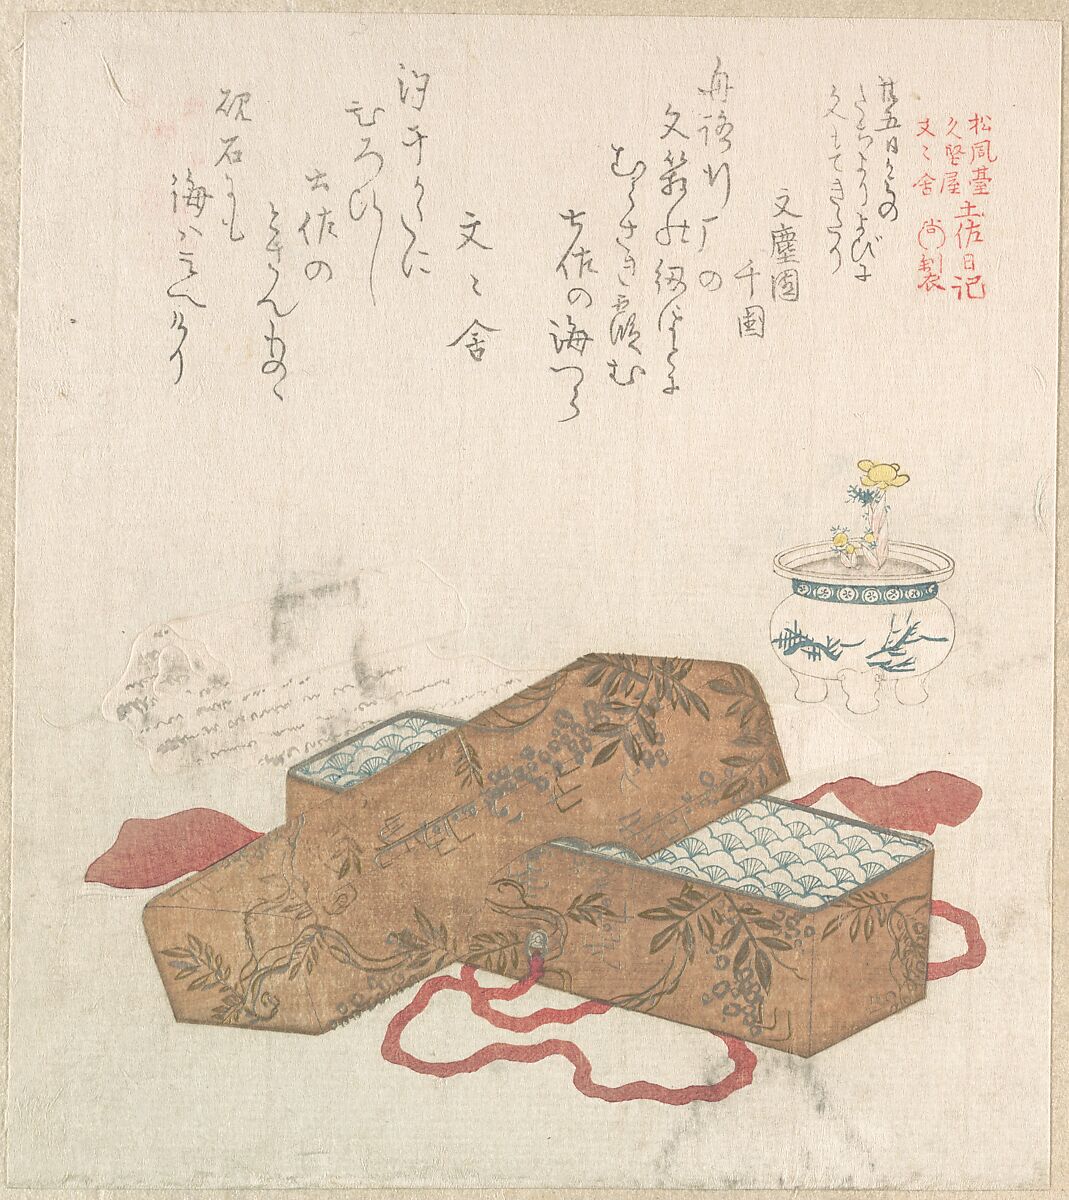 Letter-Box with Letter and Potted Flower, Kubo Shunman (Japanese, 1757–1820) (?), Woodblock print (surimono); ink and color on paper, Japan 